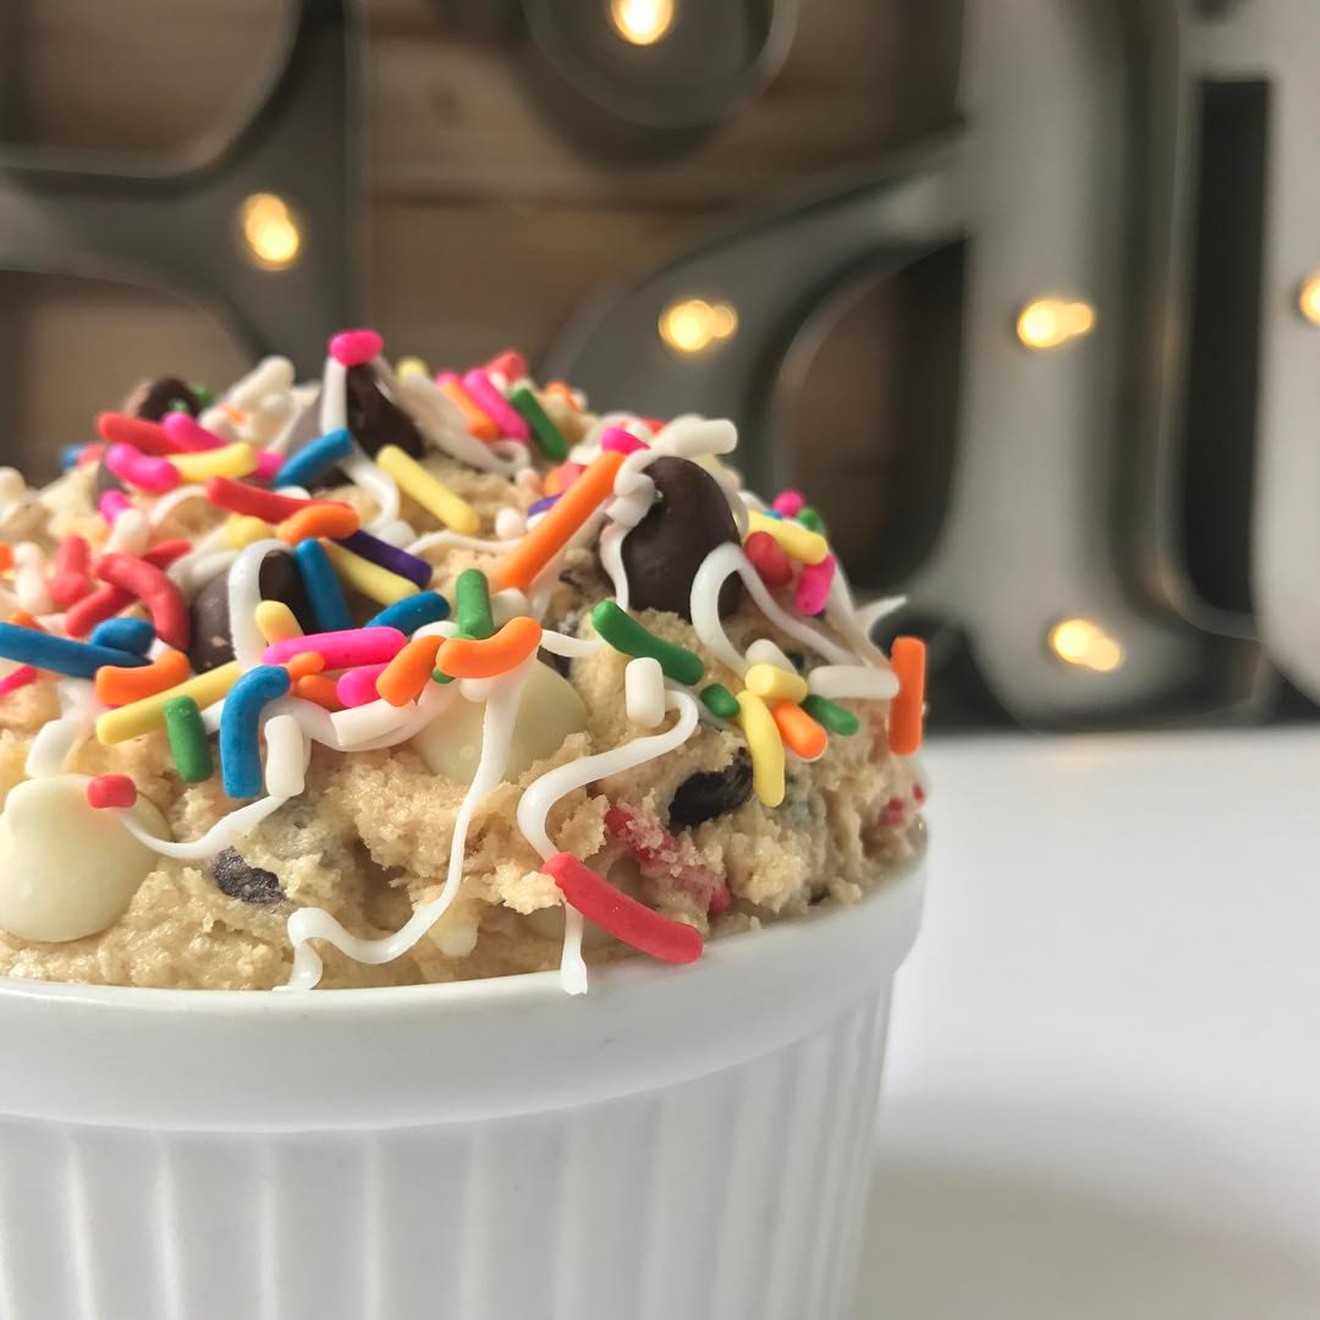 Happy Birthday Dough You: Edible cookie dough with rainbow sprinkles, white and semisweet chocolate chips, and vanilla icing.